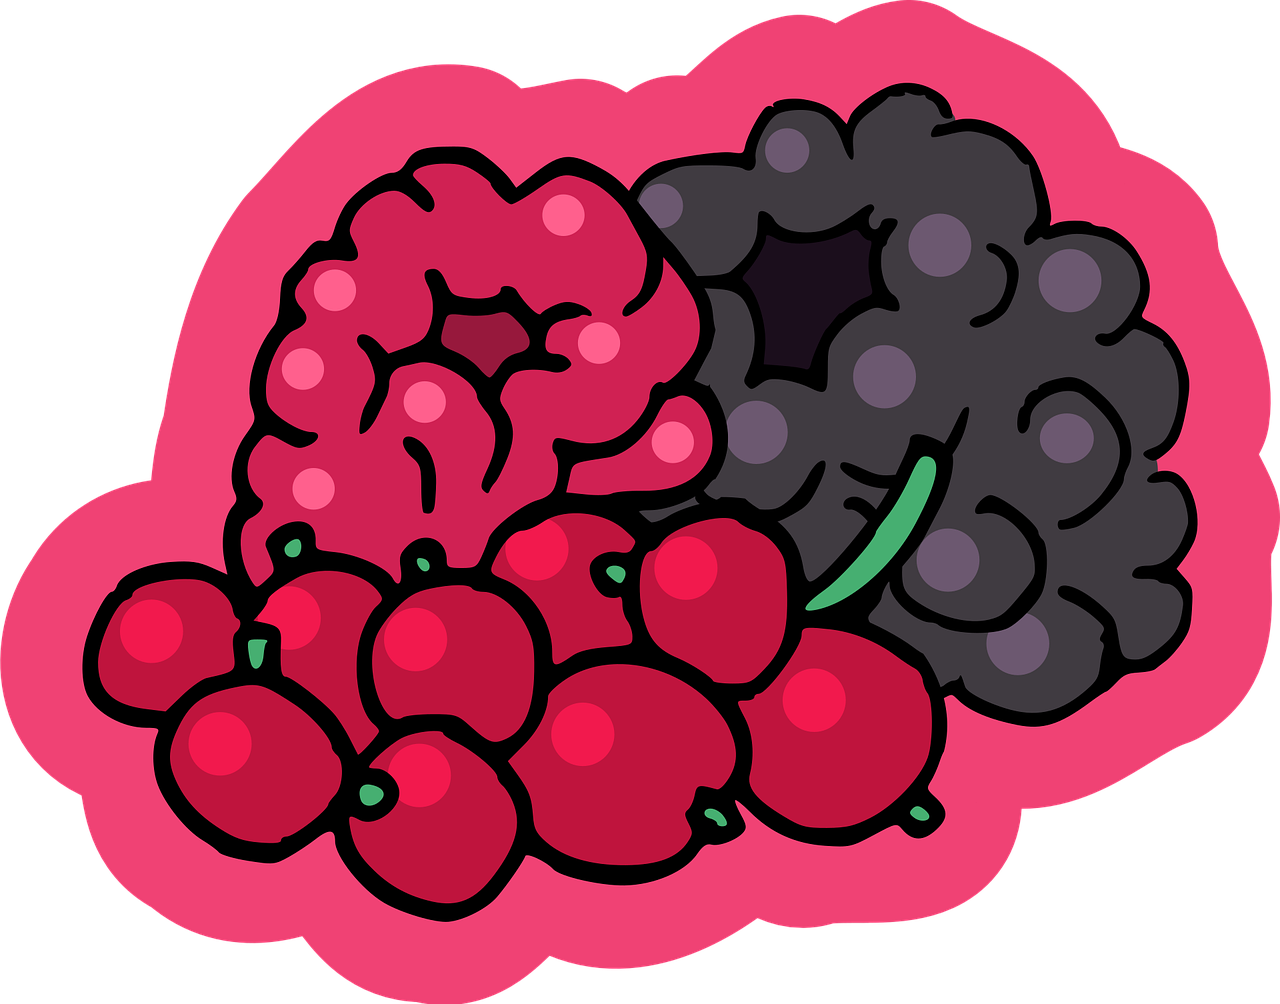 a pile of blackberries and raspberries on a pink background, by Tom La Padula, pixabay, pop art, adam and eve inside the brain, black and red scheme, featuring brains, yume nikki